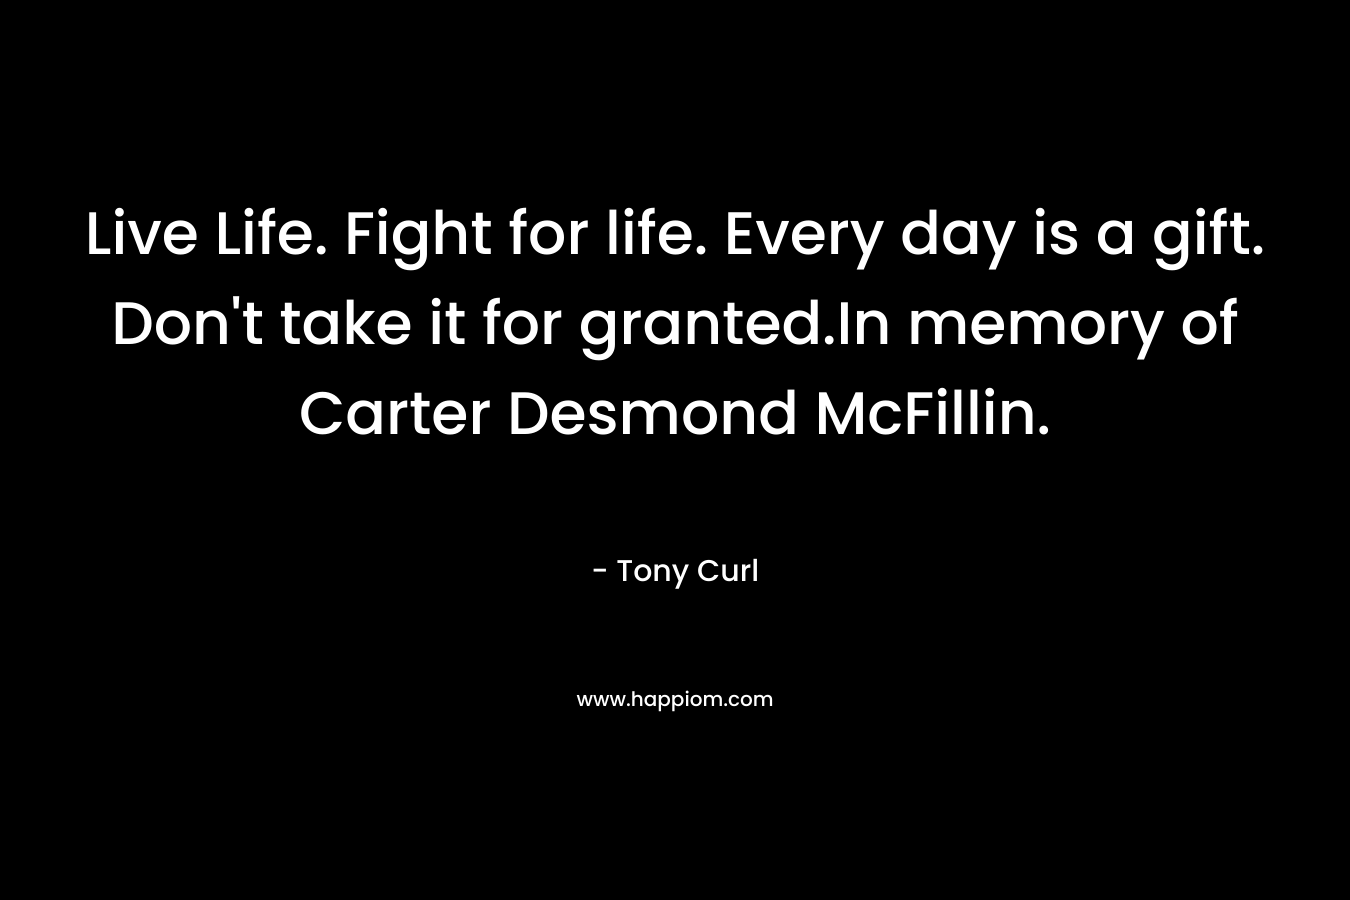 Live Life. Fight for life. Every day is a gift. Don't take it for granted.In memory of Carter Desmond McFillin.